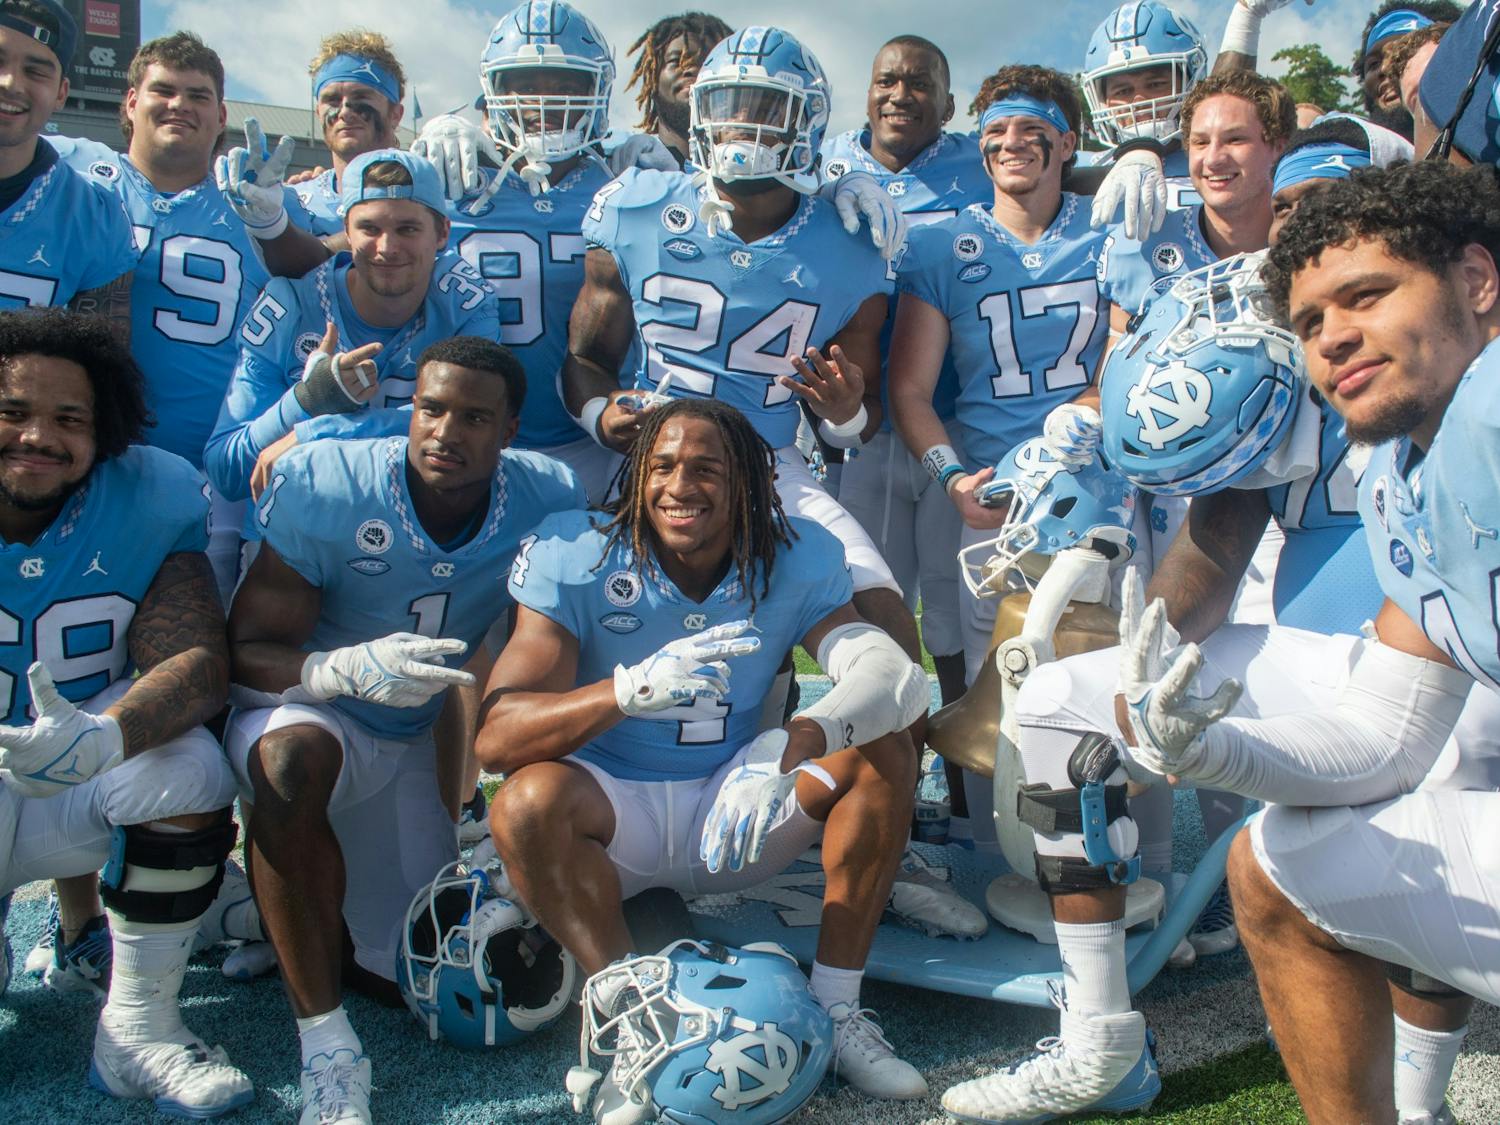 In the Battle for the Victory Bell, the North Carolina football team shut down Duke in a 38-7 win. The victory gave the Tar Heels their third consecutive victory in the rivalry, and the 11th in a row for Mack Brown against the Blue Devils. The offense was led by sophomore receiver Josh Downs, who finished with 168 yards and a touchdown. Defensively, the Tar Heels contained Duke and scored its first defensive touchdown of the season.